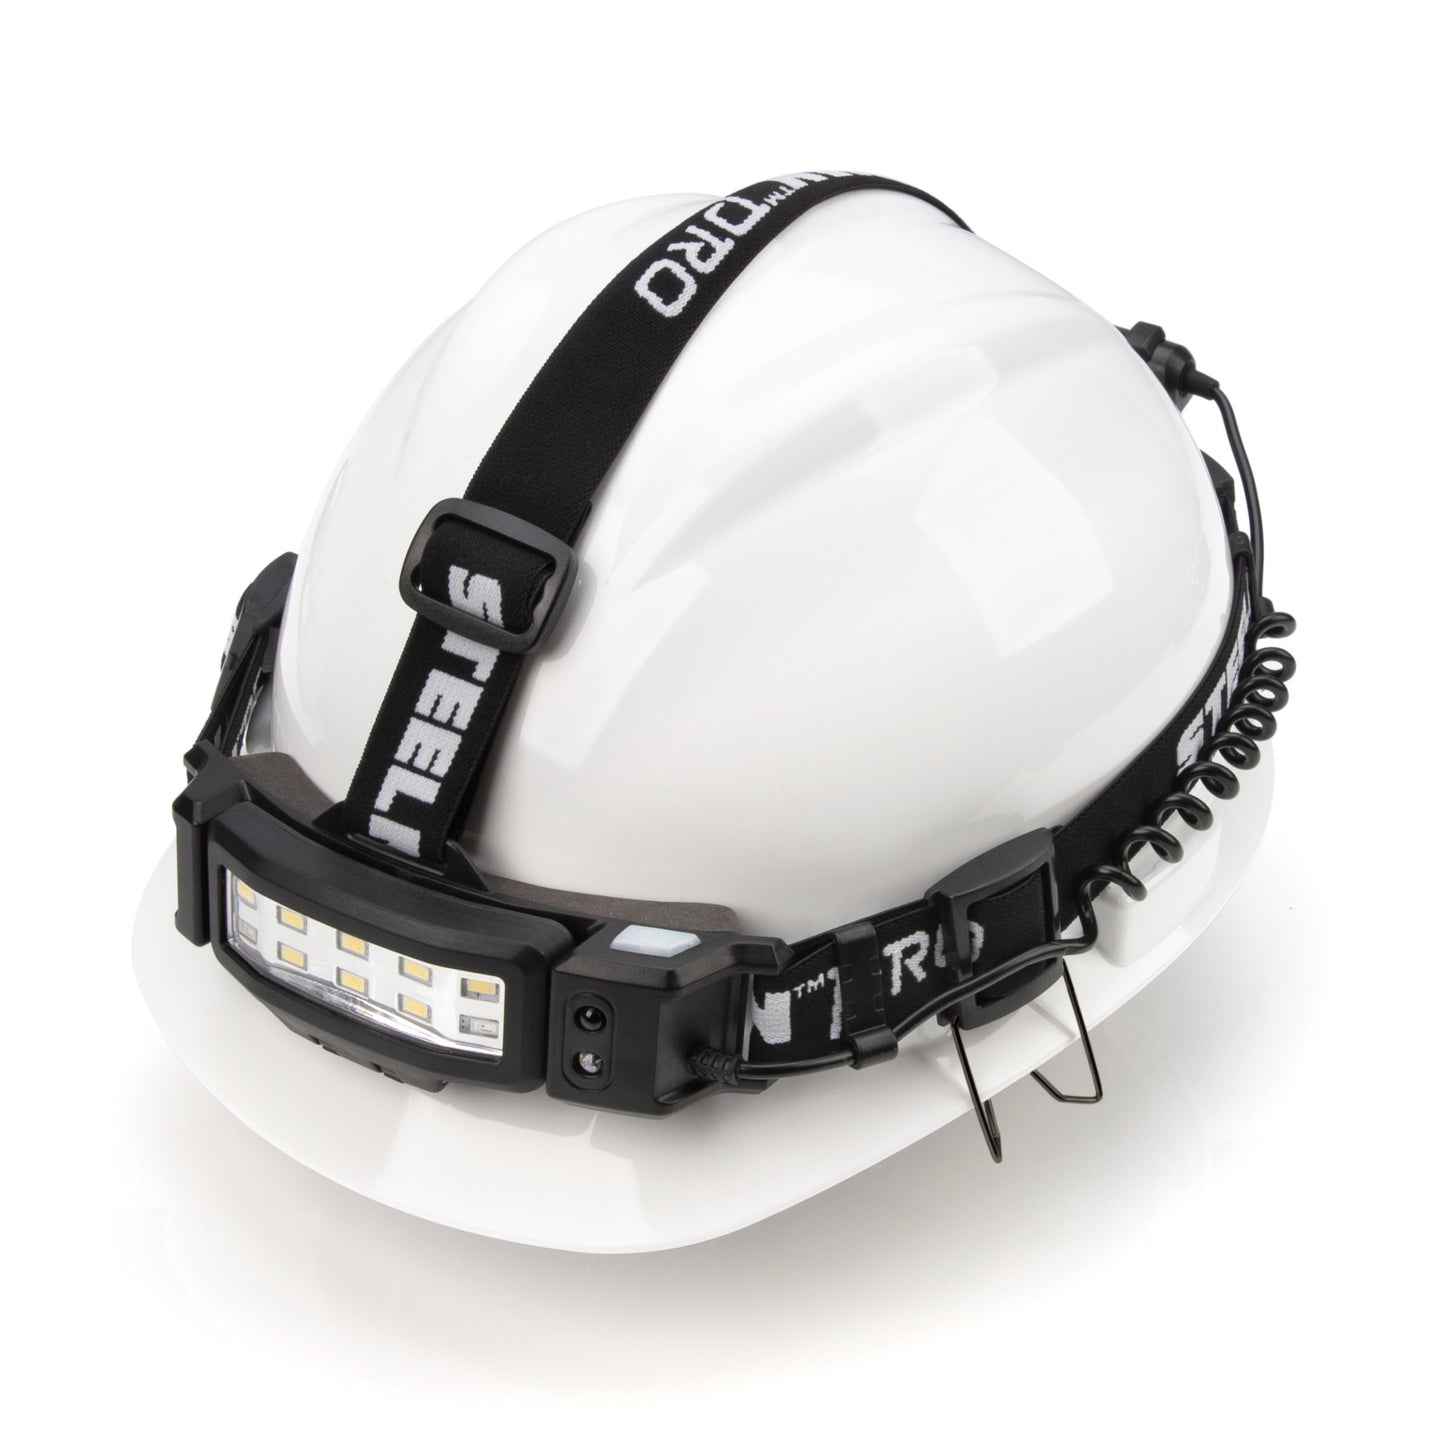 Slim Profile Motion-Activated LED Headlamp with Red LED Mode